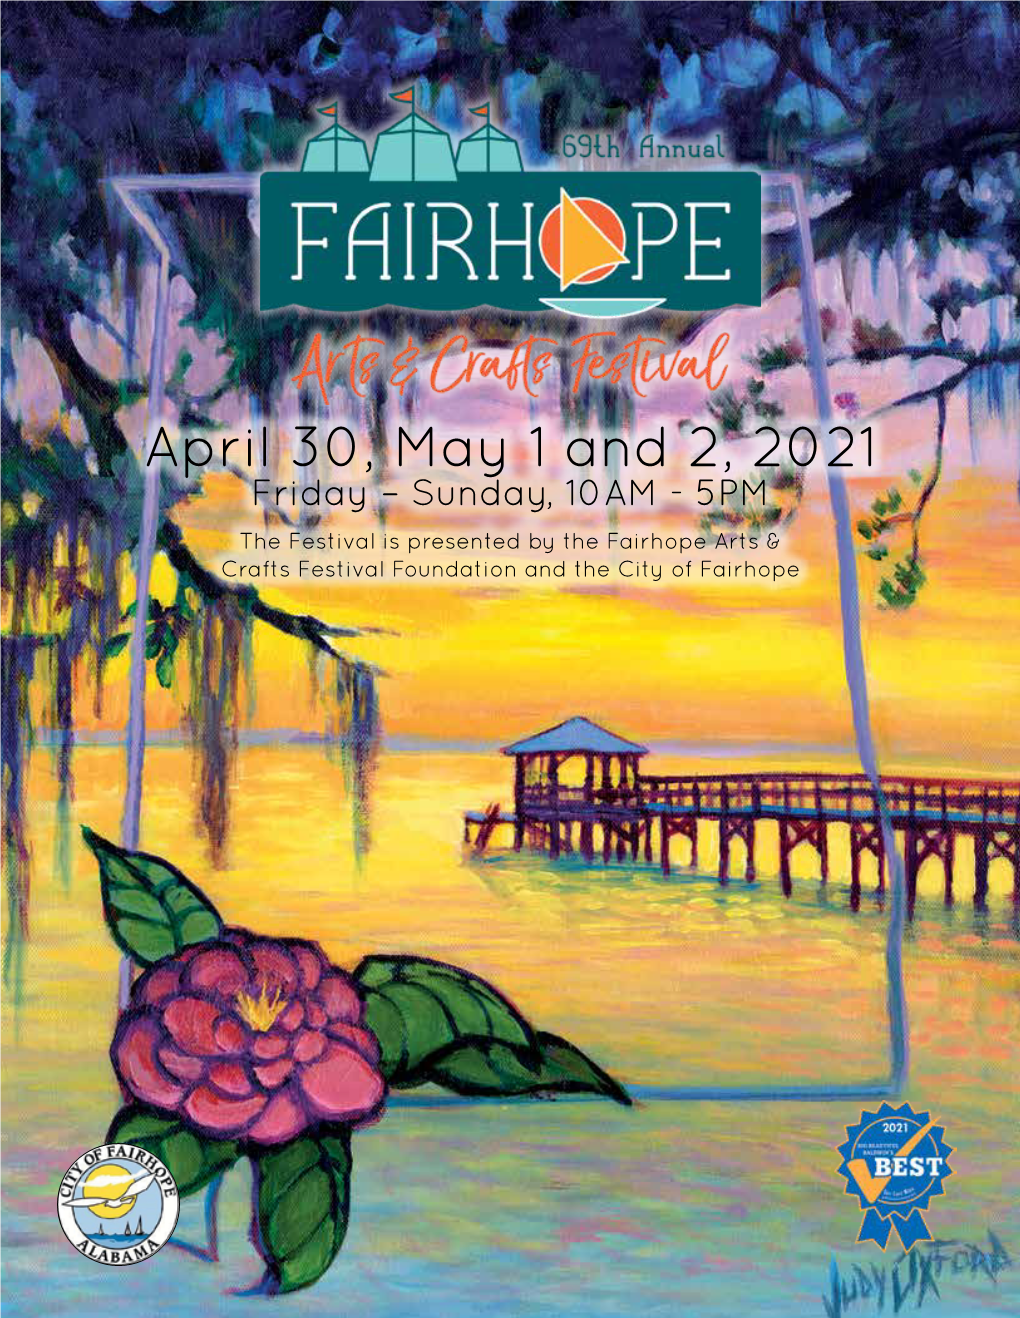 April 30, May 1 and 2, 2021 Friday – Sunday, 10AM - 5PM the Festival Is Presented by the Fairhope Arts & Crafts Festival Foundation and the City of Fairhope